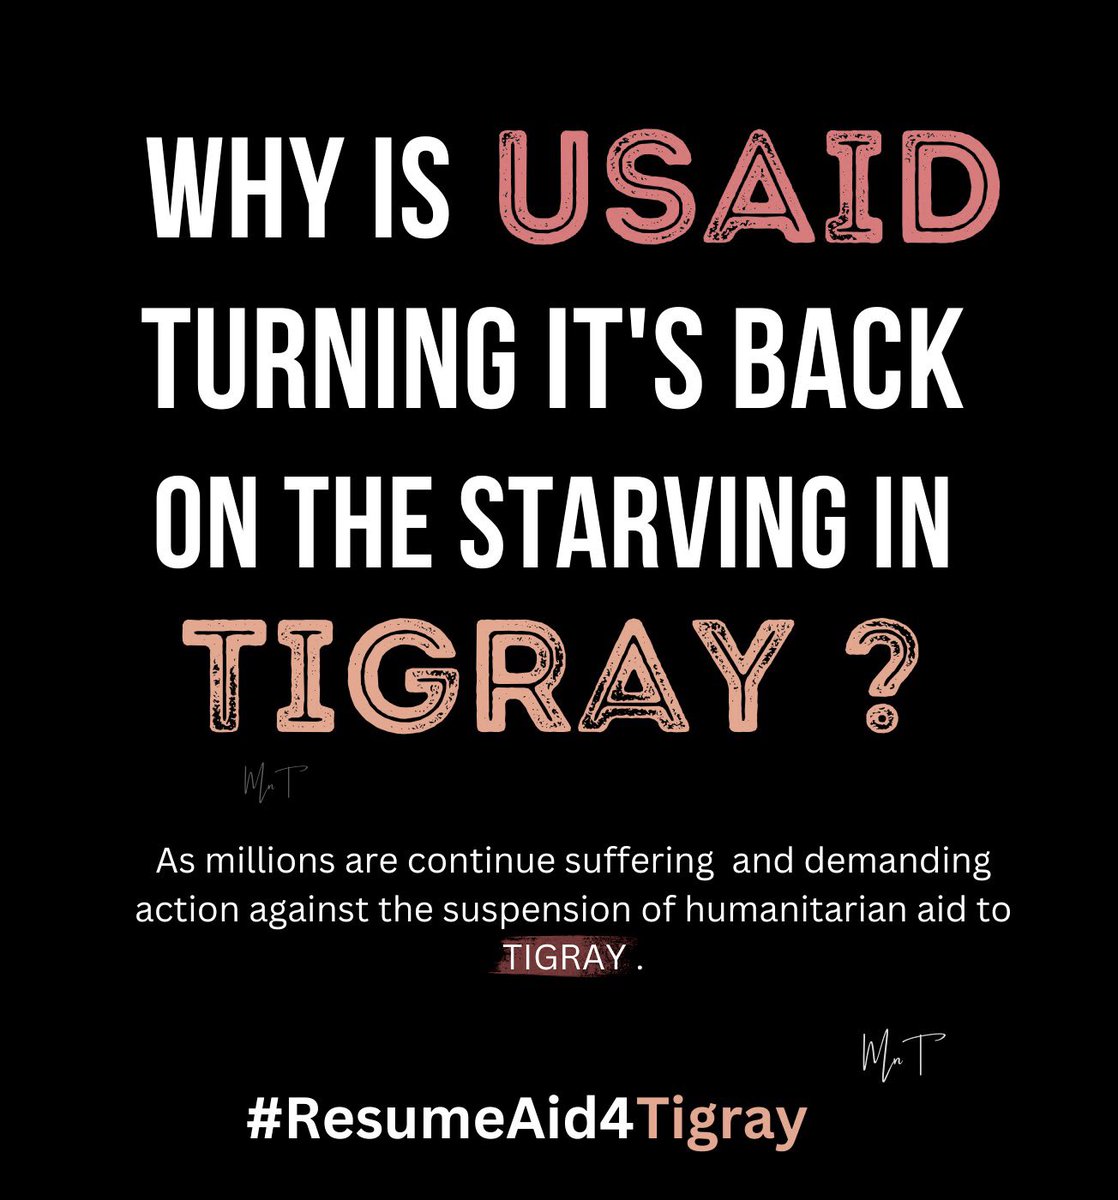 🚨 The situation in #Tigray is dire. Food shortages, atrocities & CRSV persist. @WFP & @USAID, Time to Act Now. Restore food aid with increased oversight. People in Tigray cannot be punished for the few abusing the system #RestoreAidNow @UNICEF @FAO